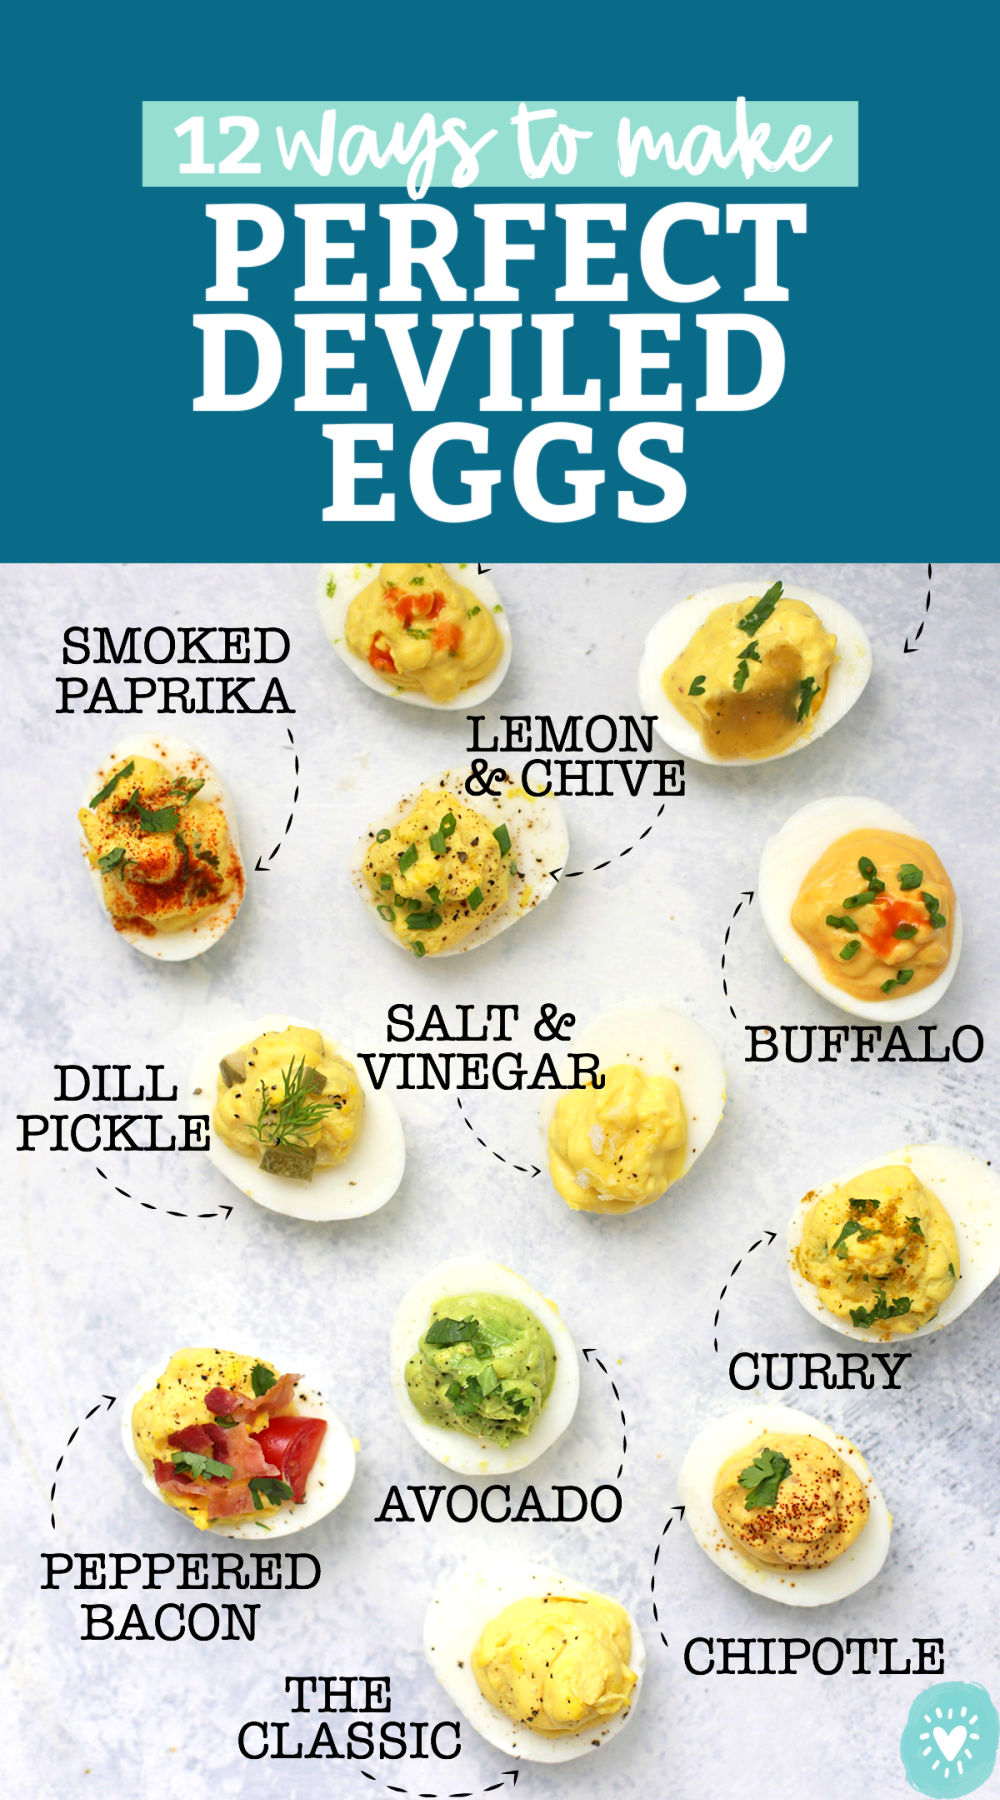 How to Make Perfect Deviled Eggs - My FAVORITE method for deviled eggs plus TWELVE delicious flavor combinations! All are paleo approved, gluten free, and absolutely delicious. // Paleo deviled eggs // the best deviled eggs recipe // deviled eggs no mayo // classic deviled eggs // perfect deviled eggs // 12 flavors of deviled eggs // #deviledeggs #hardboiledeggs #eggs #appetizers #paleo #glutenfree #potluck #picnic #barbecue